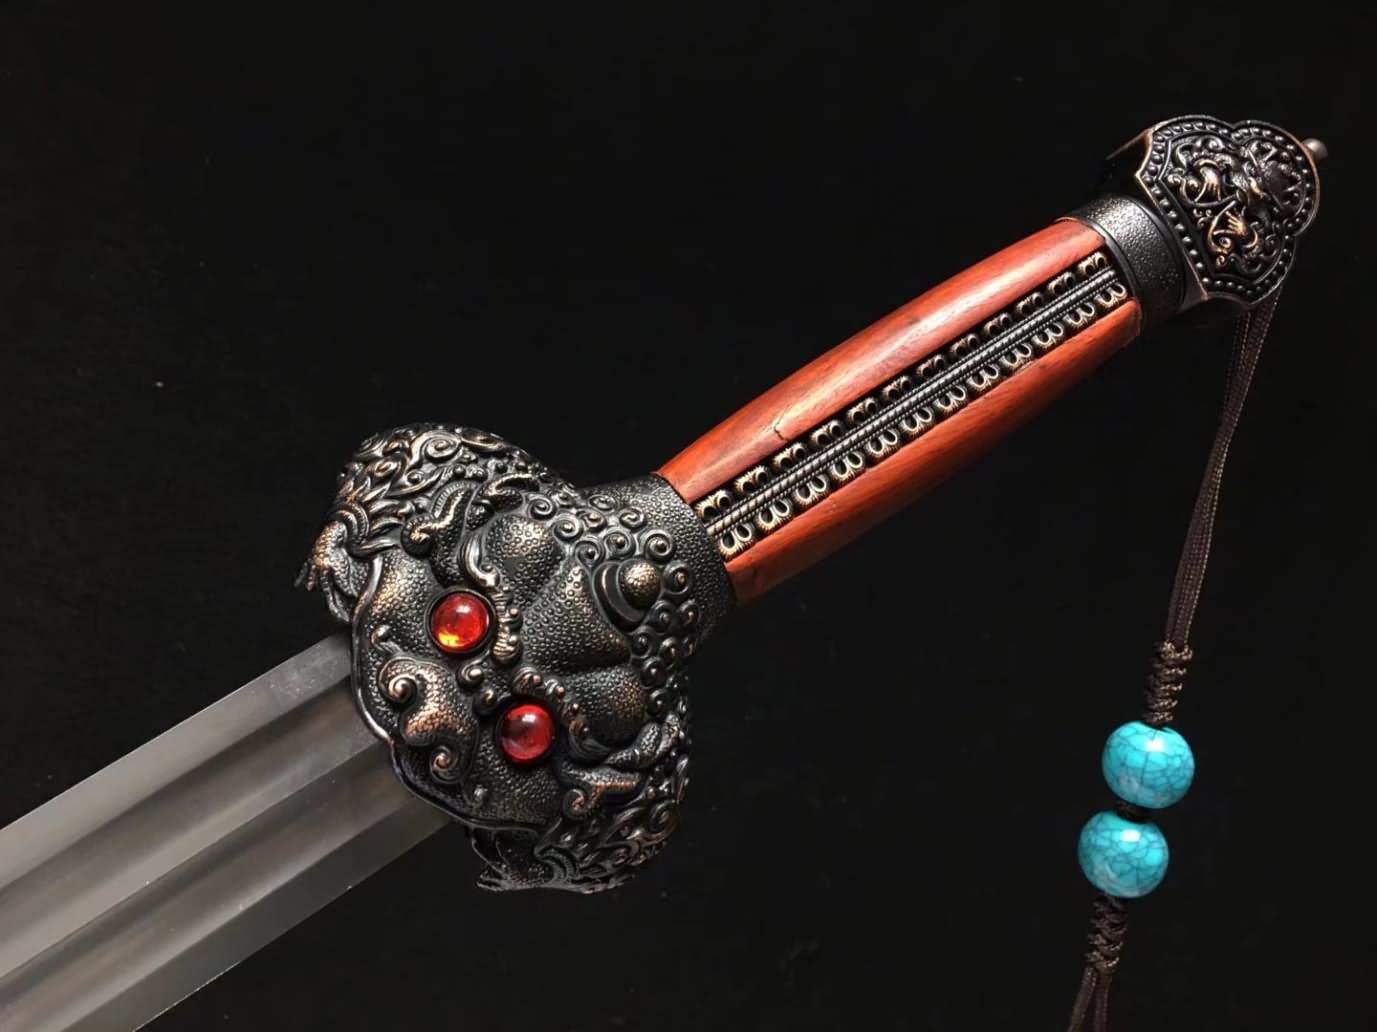 Yongle jian Swords Real,Forged High Carbon Steel Blade,Redwood,Alloy Fittings,chinese sword